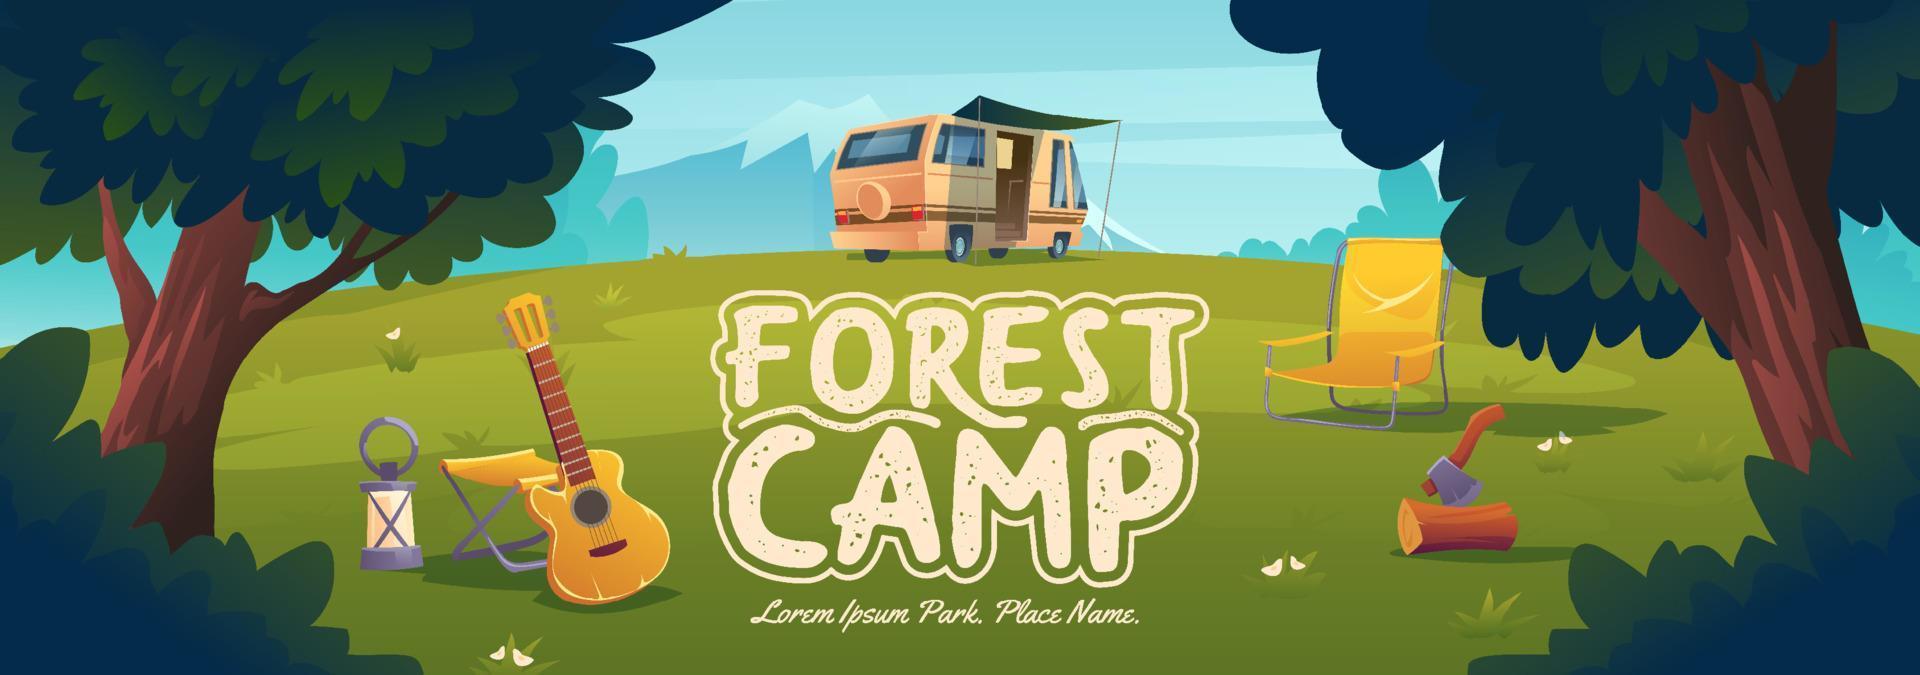 Forest camp poster with van, chair and guitar vector